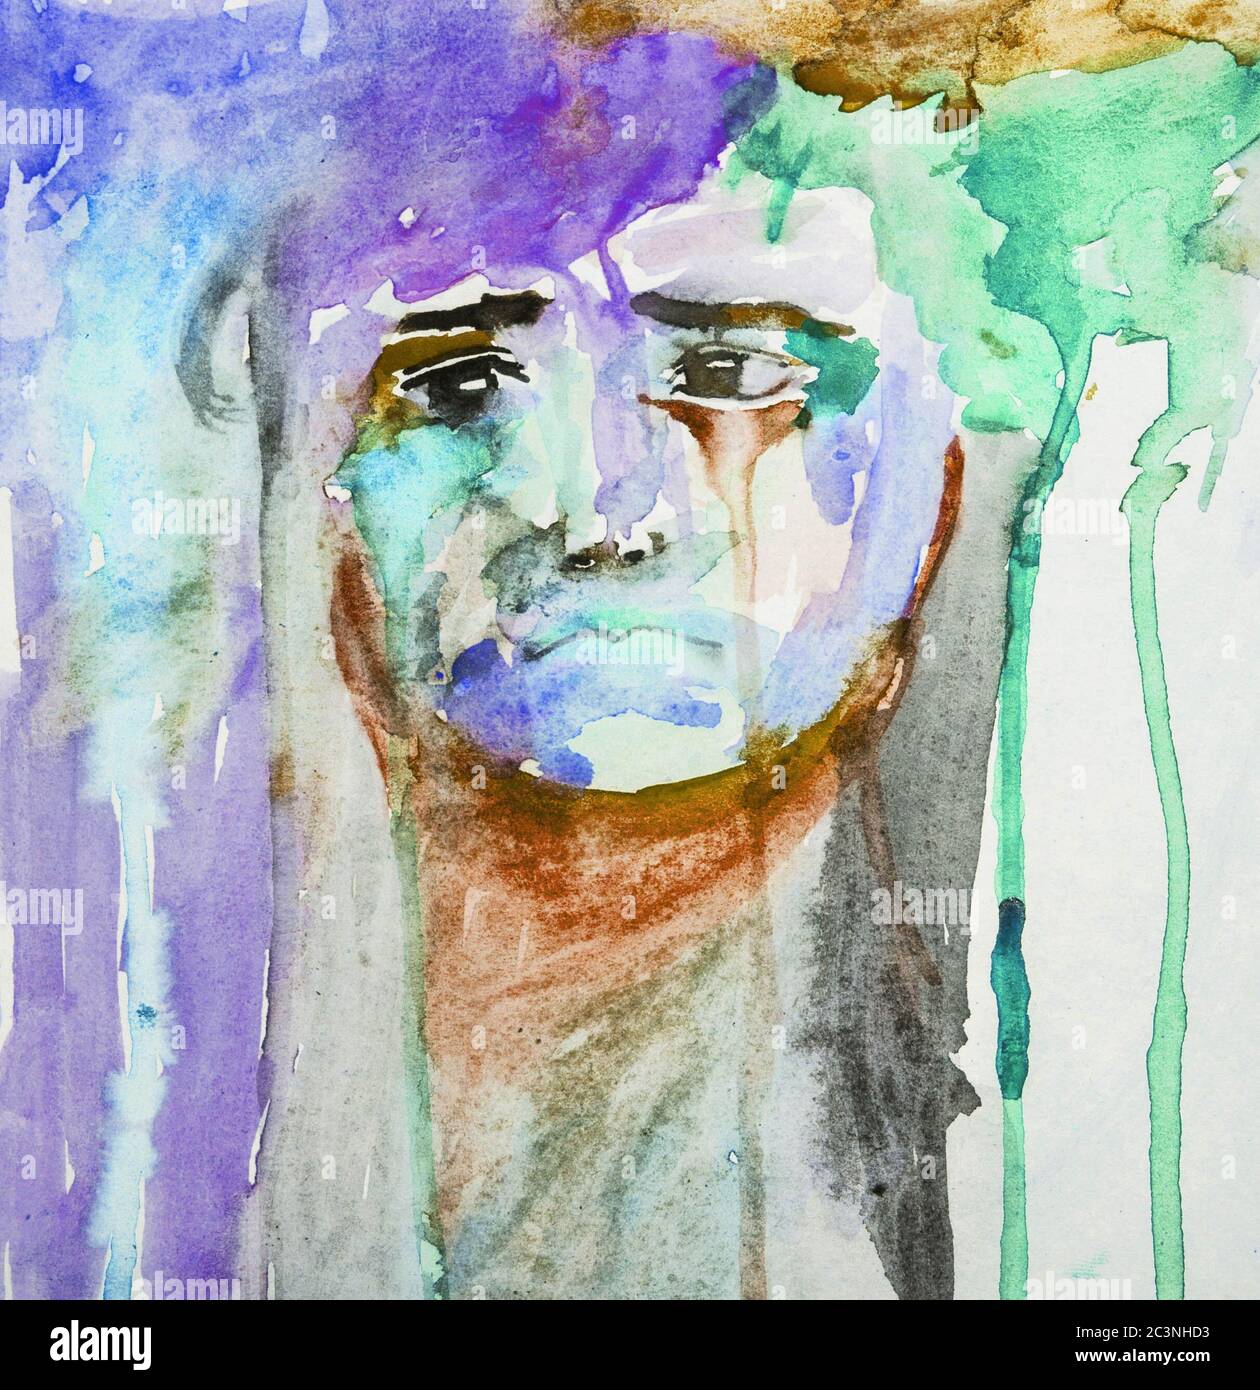 Unhappy Little Sad Kid Portrait - Abstract Watercolor Painting Colorful Stock Photo